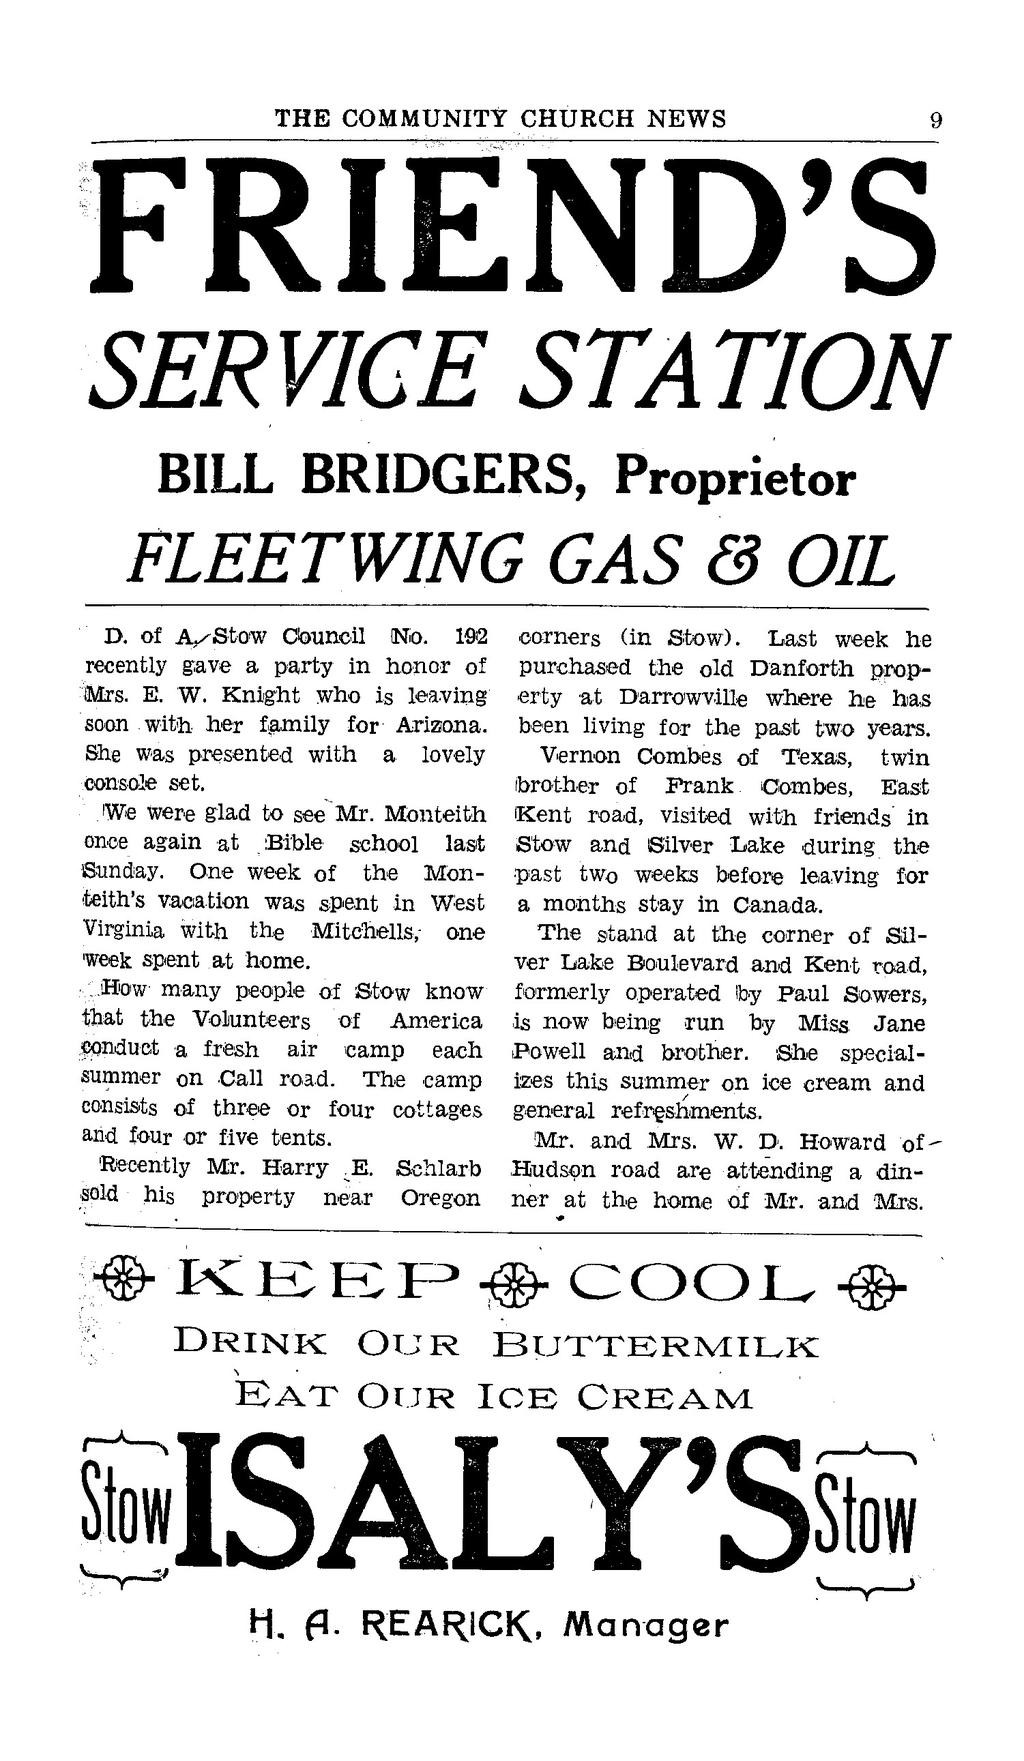 10 THE COMMUNITY CHURCH NEWS; FRIEND'S SERVICE STATION BILL BRIDGERS, Proprietor FLEETWING GAS & OIL D. of A,/Stow Council (No. 192 corners (in Stow).